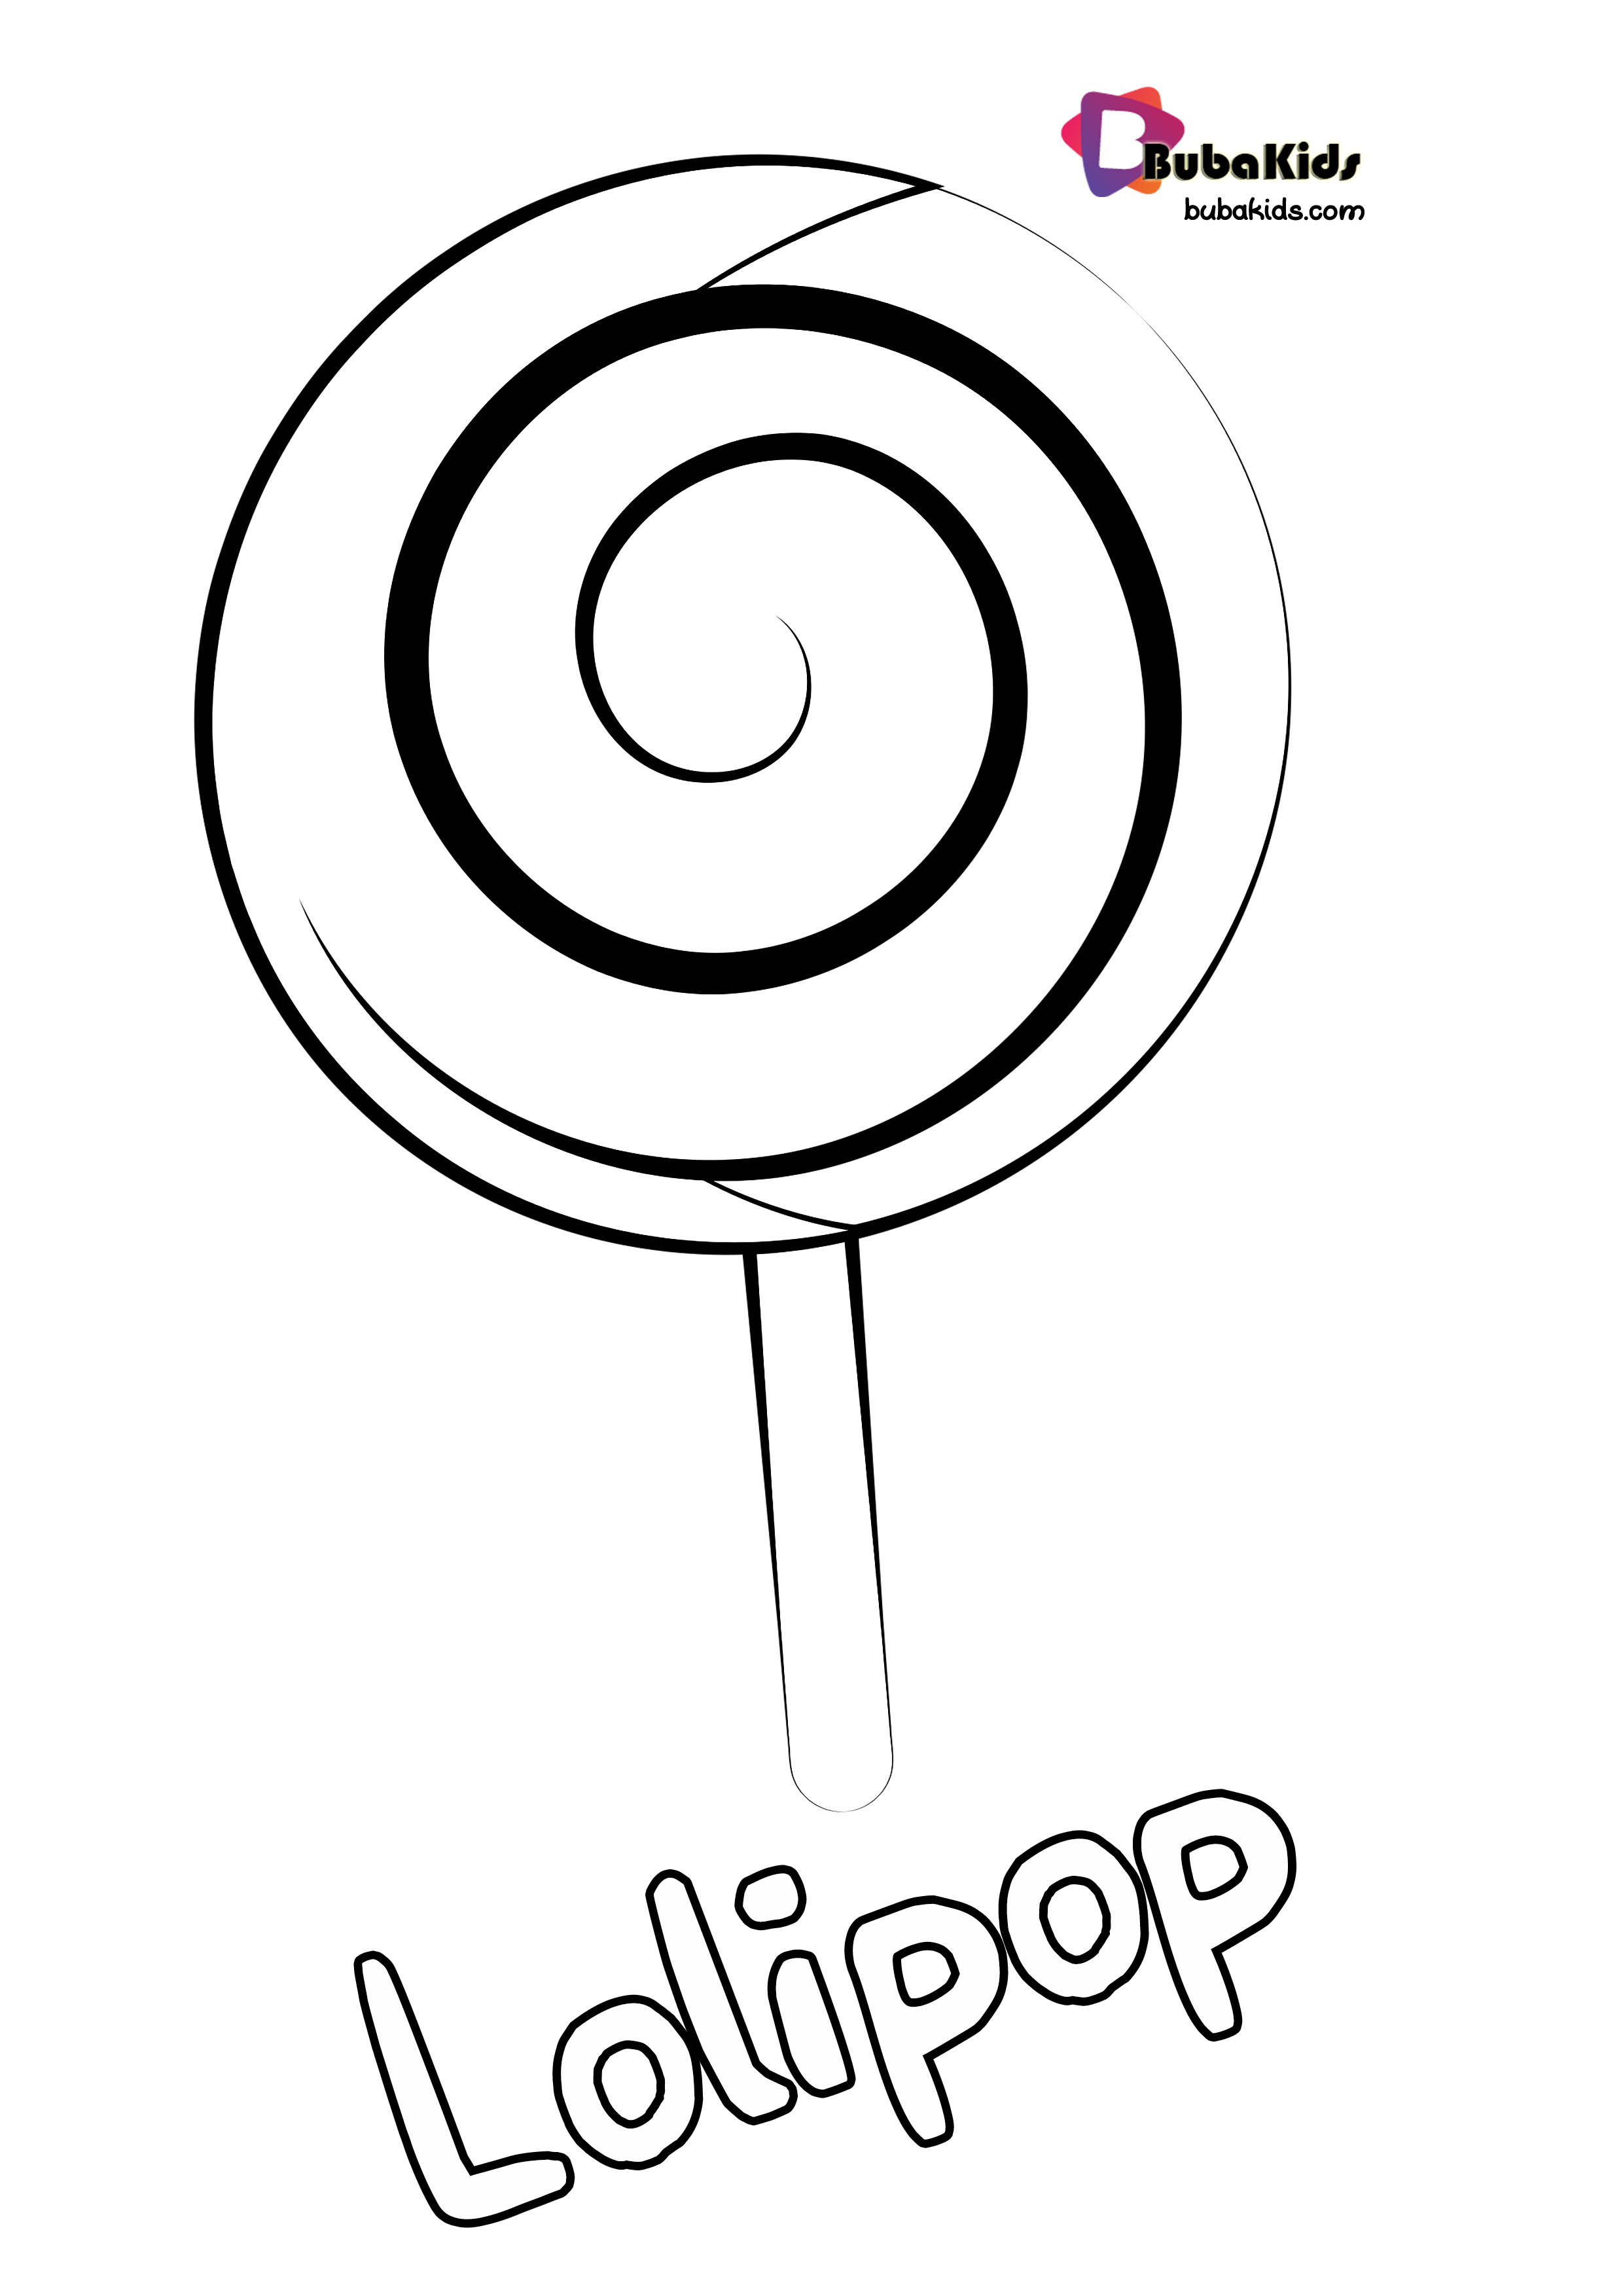 Lollipop Candy Coloring Page Wallpaper